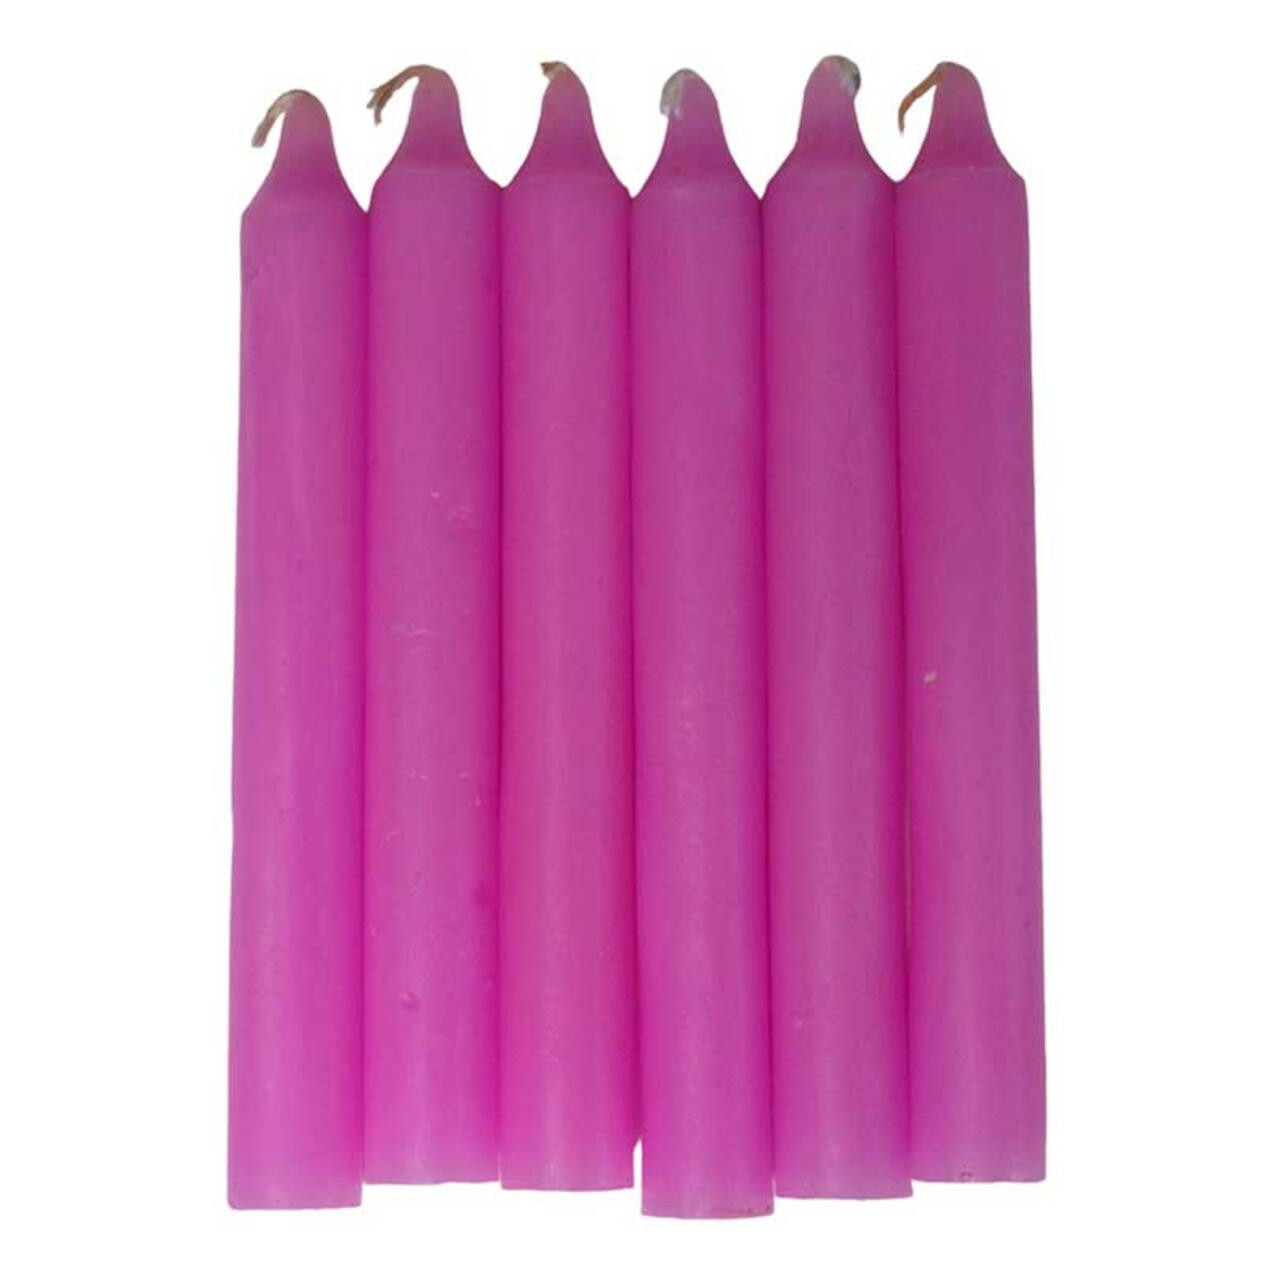 Pink 6" Household Candle (Set Of 6)